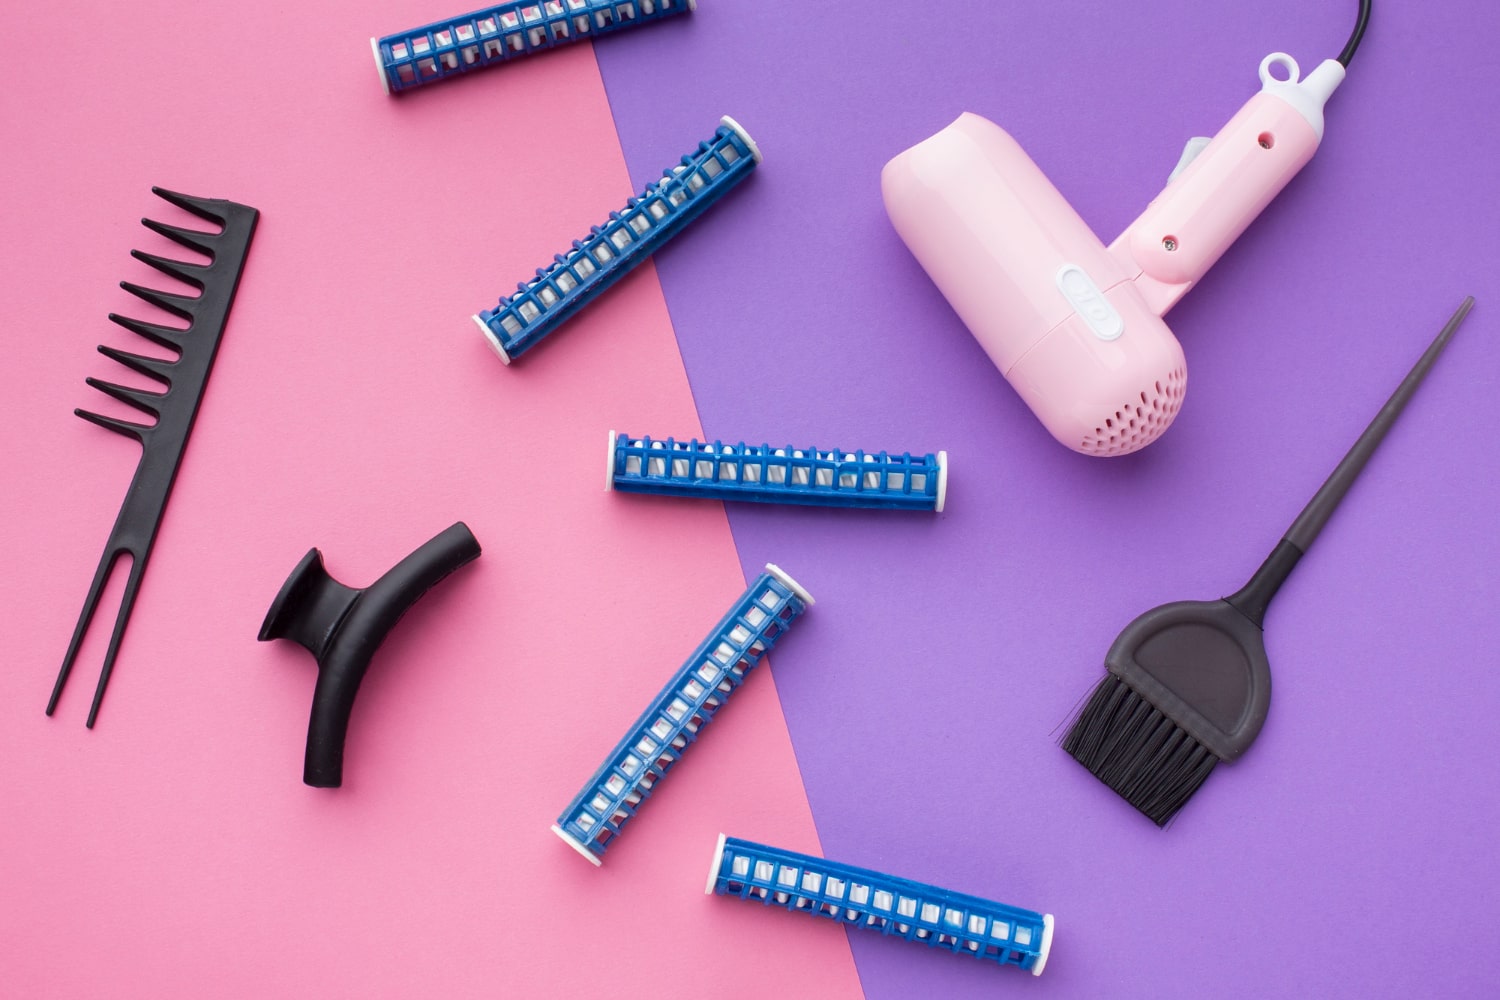 Hair styling tools on a two-tone background